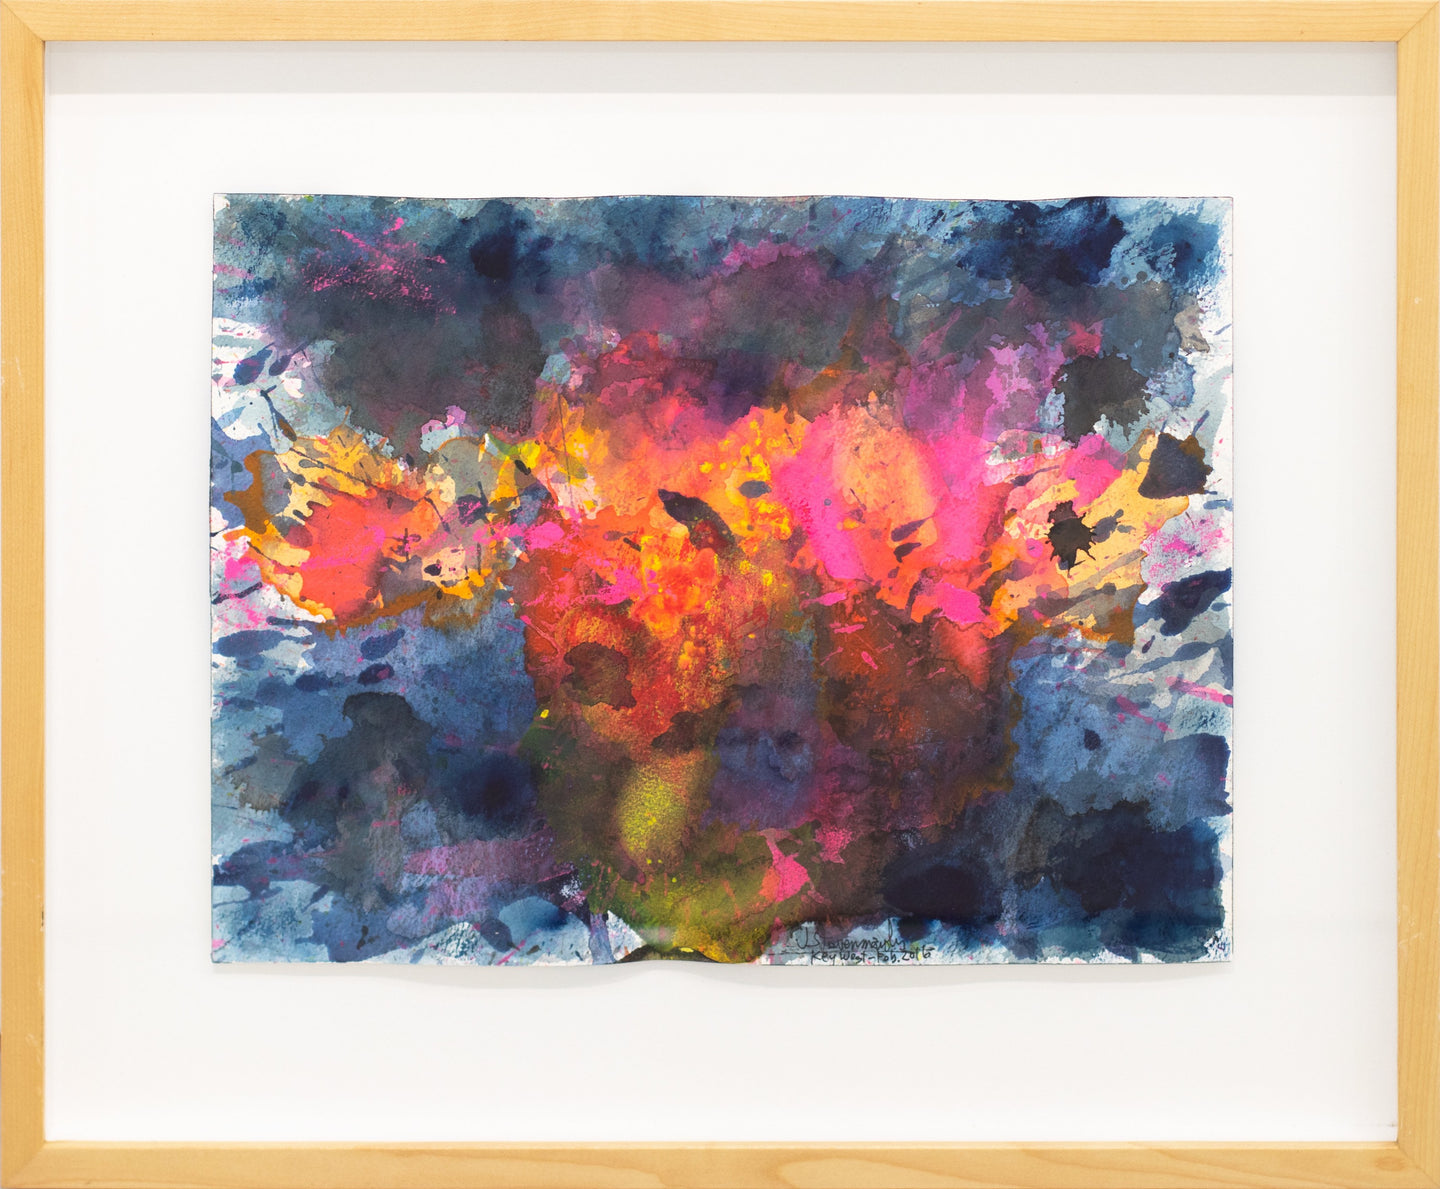 Framed:J. Steven Manolis (b. 1948-)  Key West- Splash Sunset (12.16.05), 2016  Watercolor, Acrylic and Gouache on Arches paper  12 x 16 inches Framed: 19 x 22.50 inches  Manolis, is an American abstract expressionist artist who paints in both watercolors and acrylics on canvas. He studied for 30 years under the tutelage of world renown colorist Wolf Kahn (1927-2020). 